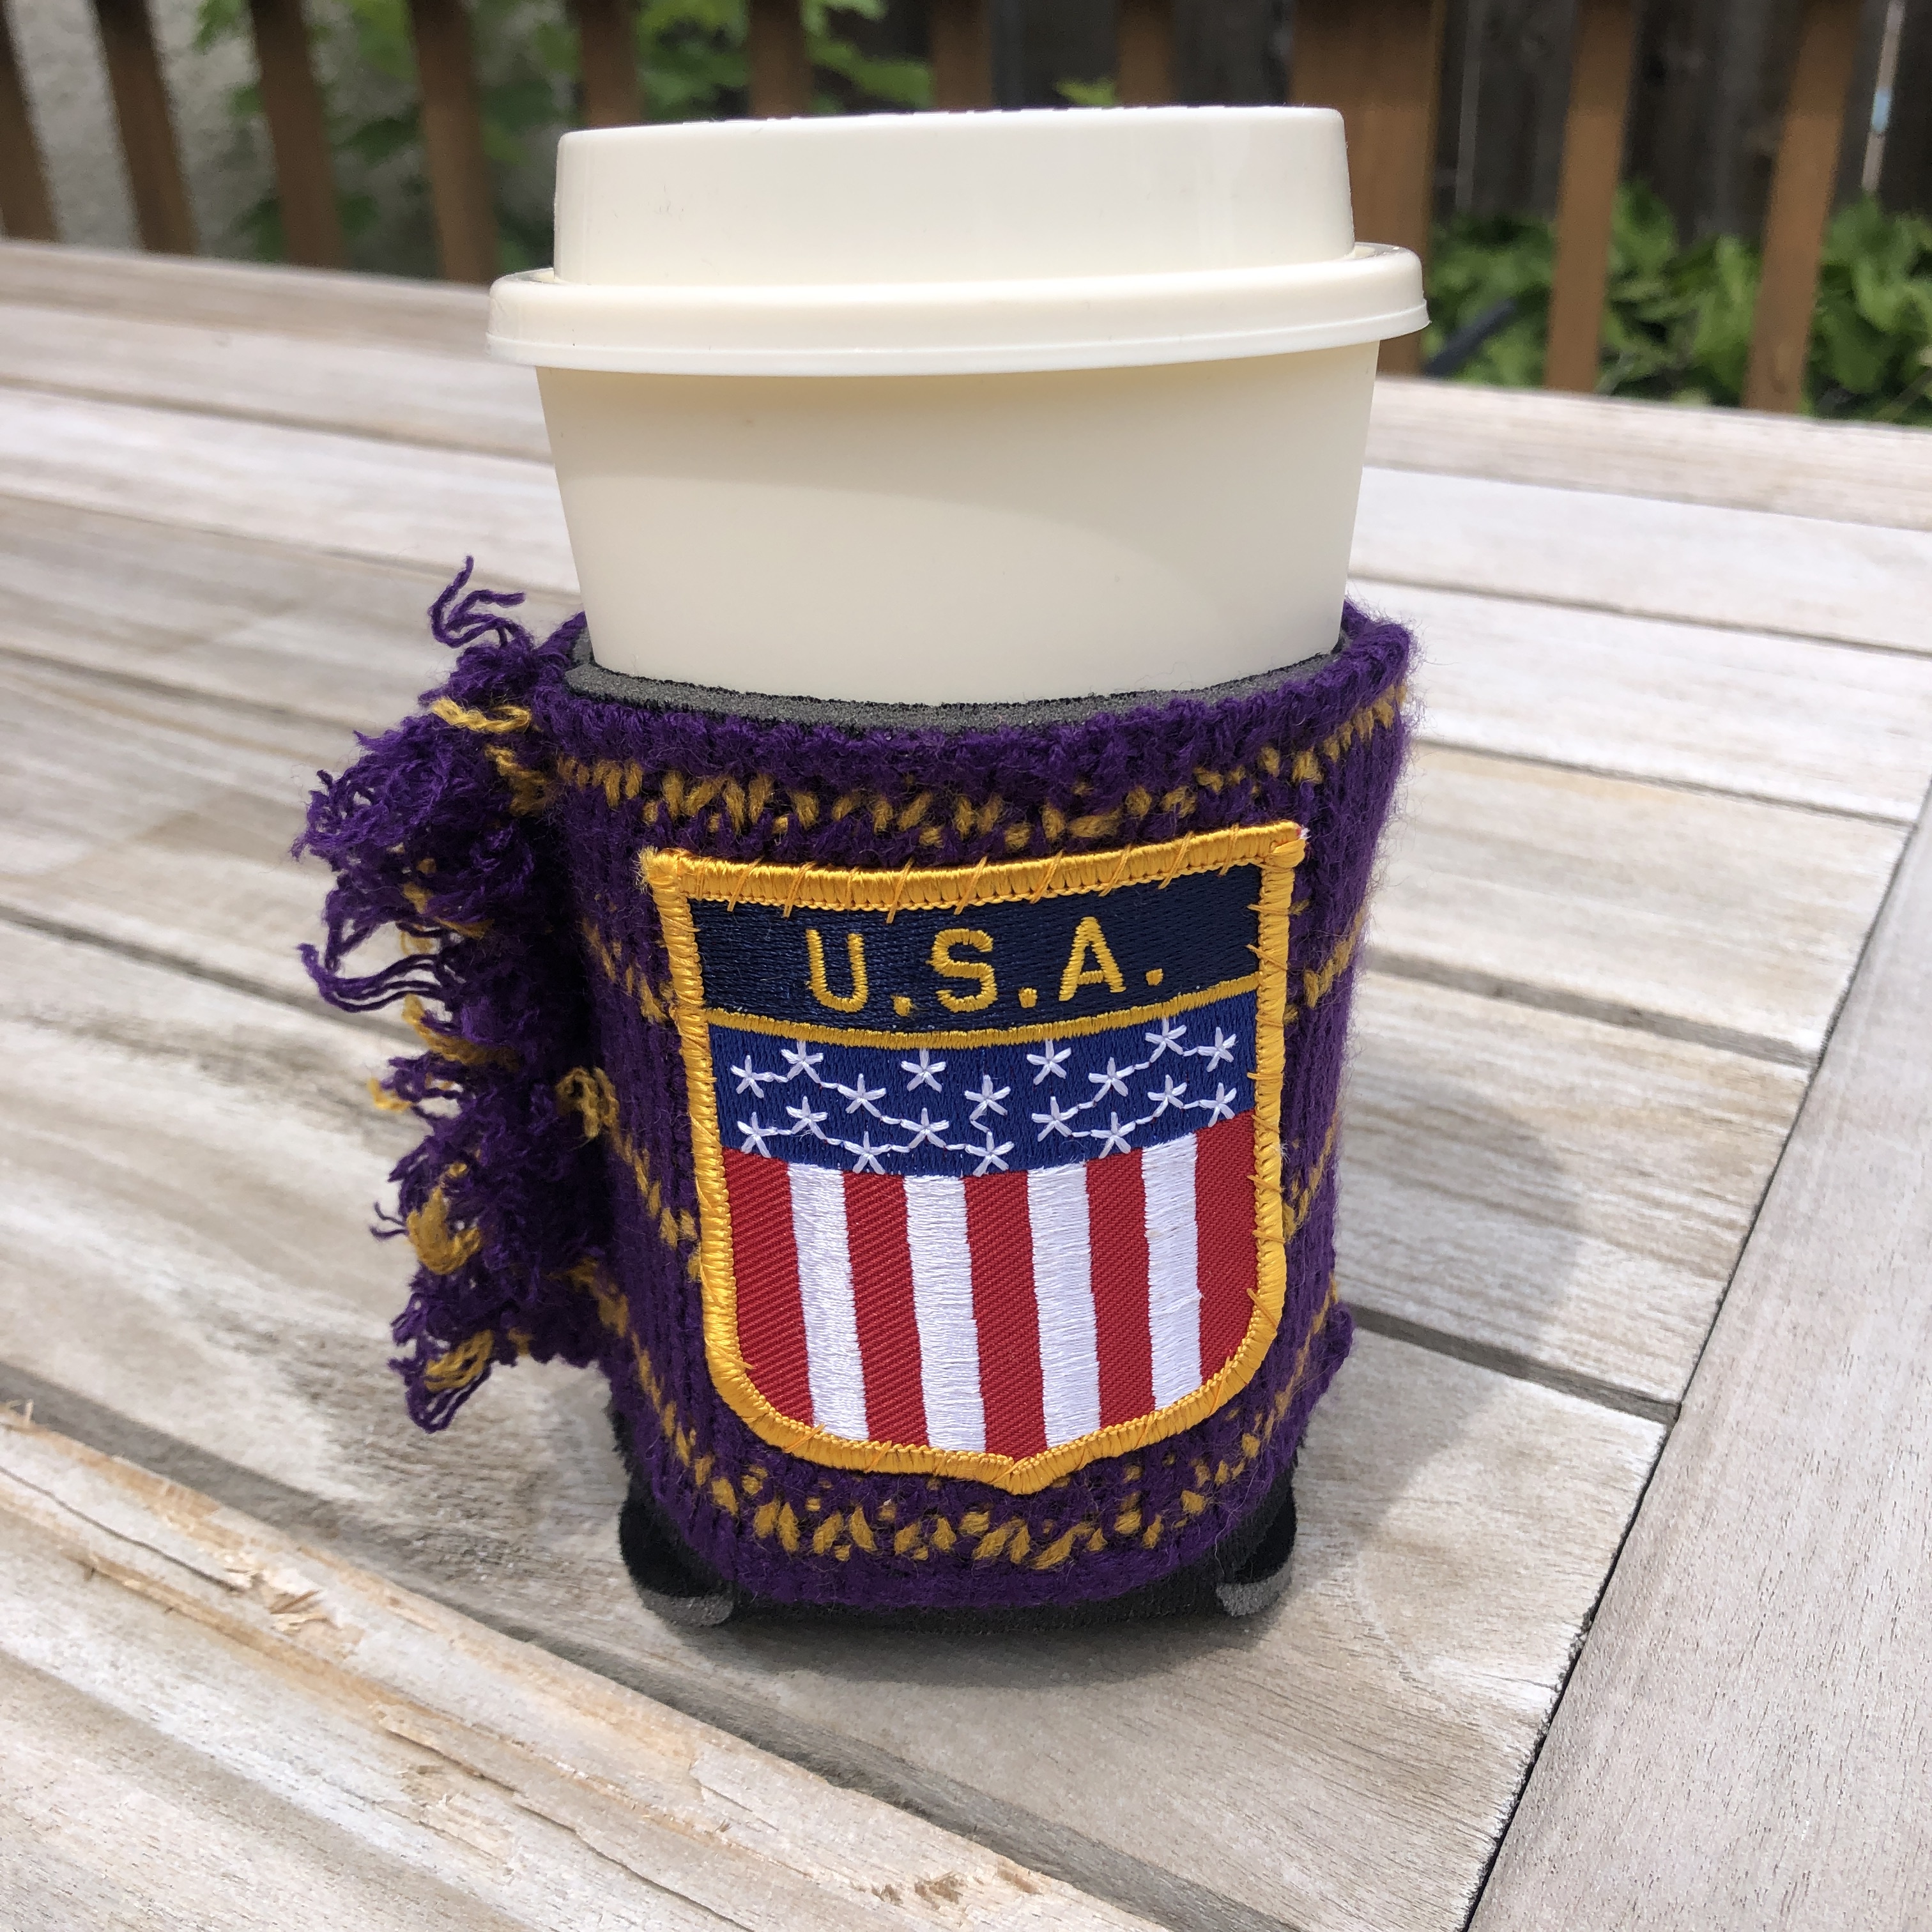 USA Patch on MN Vikings Colors Koozie - Can or Pint Holder